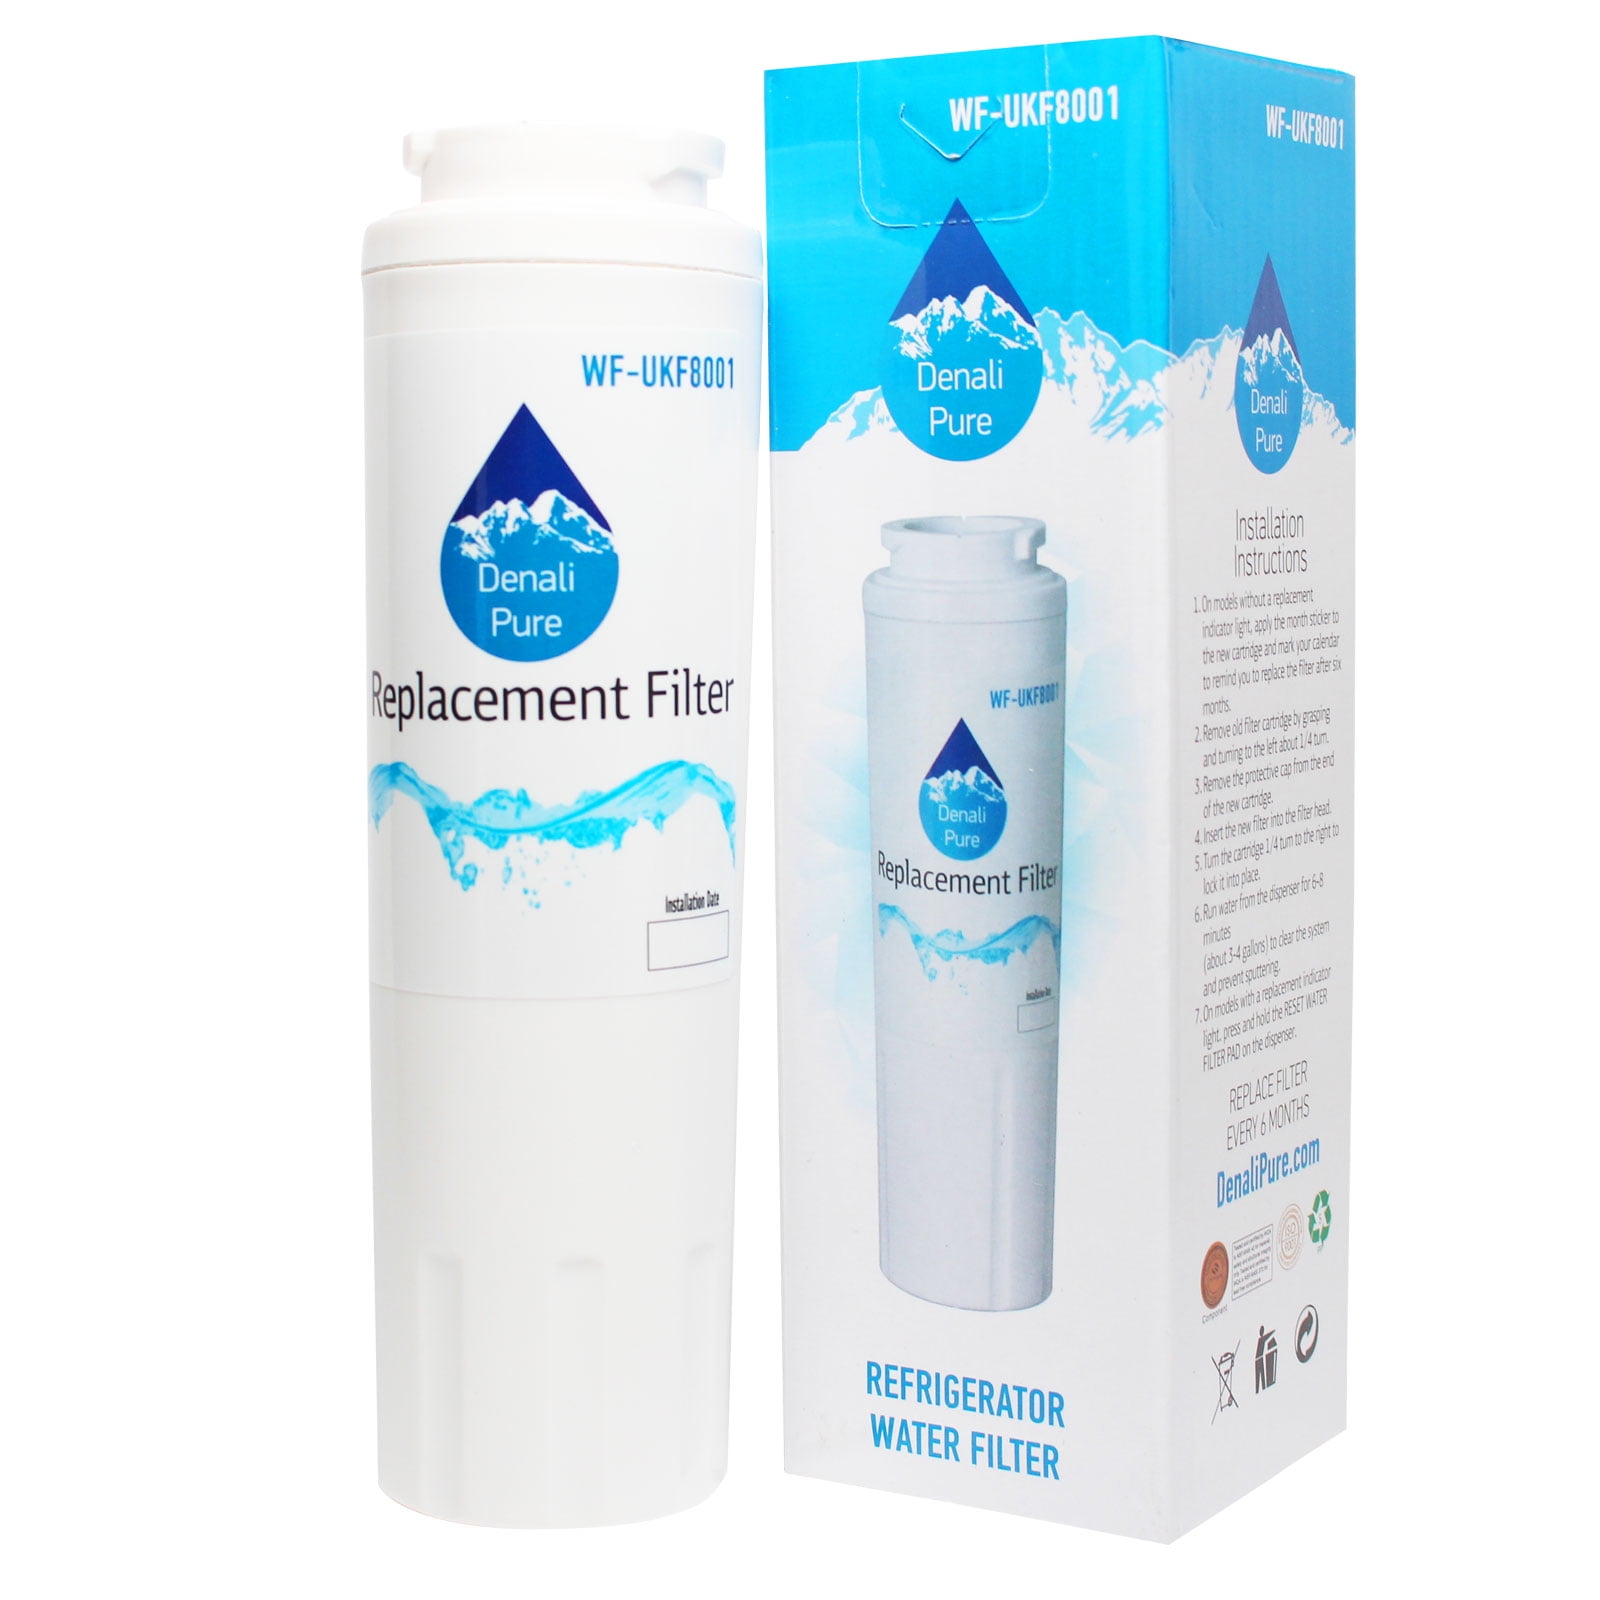 Replacement for KitchenAid KSSS42QMX Refrigerator Water Filter - Compatible  with KitchenAid 4396508, 4396509, 4396510 Fridge Water Filter Cartridge